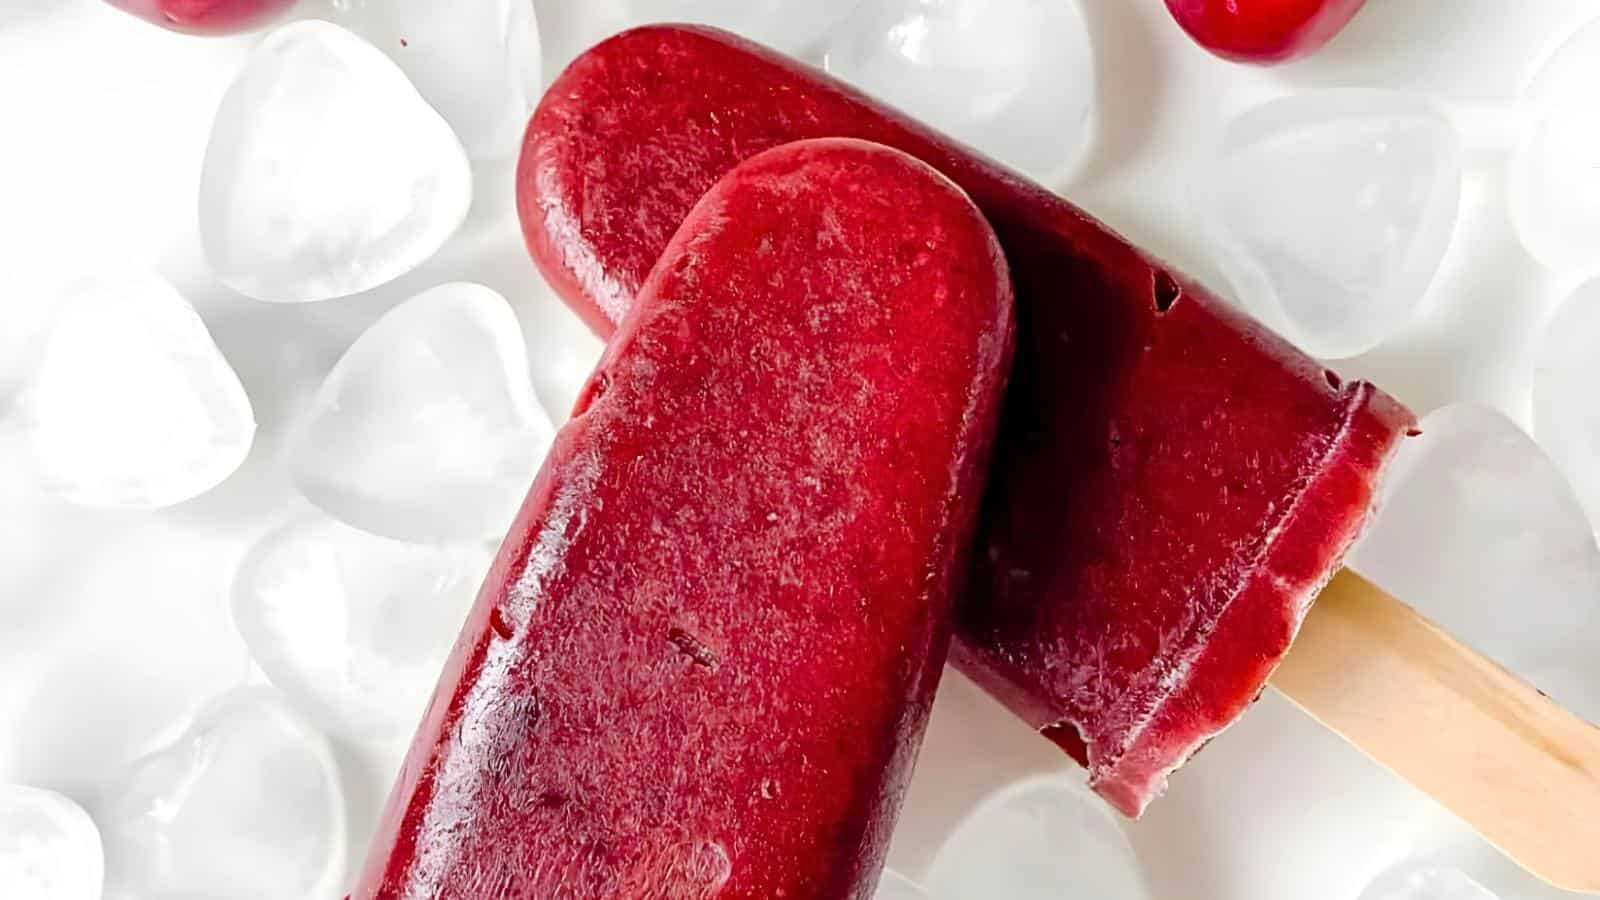 <p>These homemade popsicles are a refreshing treat for a hot day by the pool, combining the sweet flavors of cherry and mango. Simple to make, they require minimal ingredients and effort, allowing you to prepare them ahead of time. Their vibrant colors and fruity taste make them a hit with both kids and adults. Perfect for cooling down, they offer a healthy and tasty option for your guests. Enjoy these popsicles as a cool and flavorful snack between swims, making them a fun pool party treat.<br><strong>Get the Recipe: </strong><a href="https://www.throughthefibrofog.com/cherry-mango-popsicles/?utm_source=msn&utm_medium=page&utm_campaign=msn" rel="noopener">Easy Cherry Mango Popsicles</a></p>